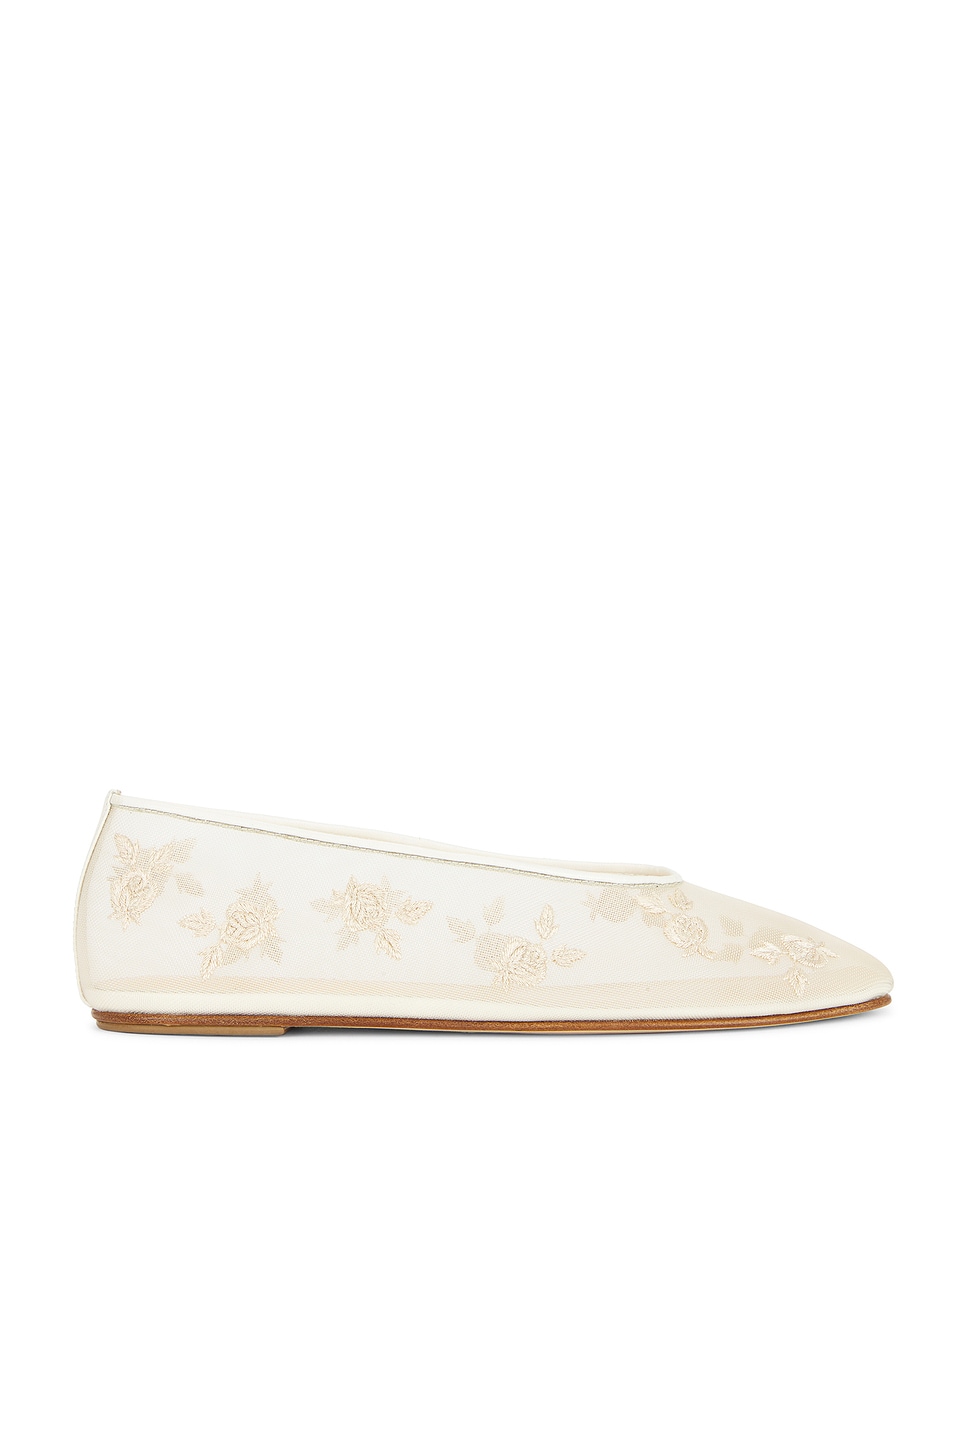 Image 1 of Magda Butrym Embroidered Ballet Flat in Cream